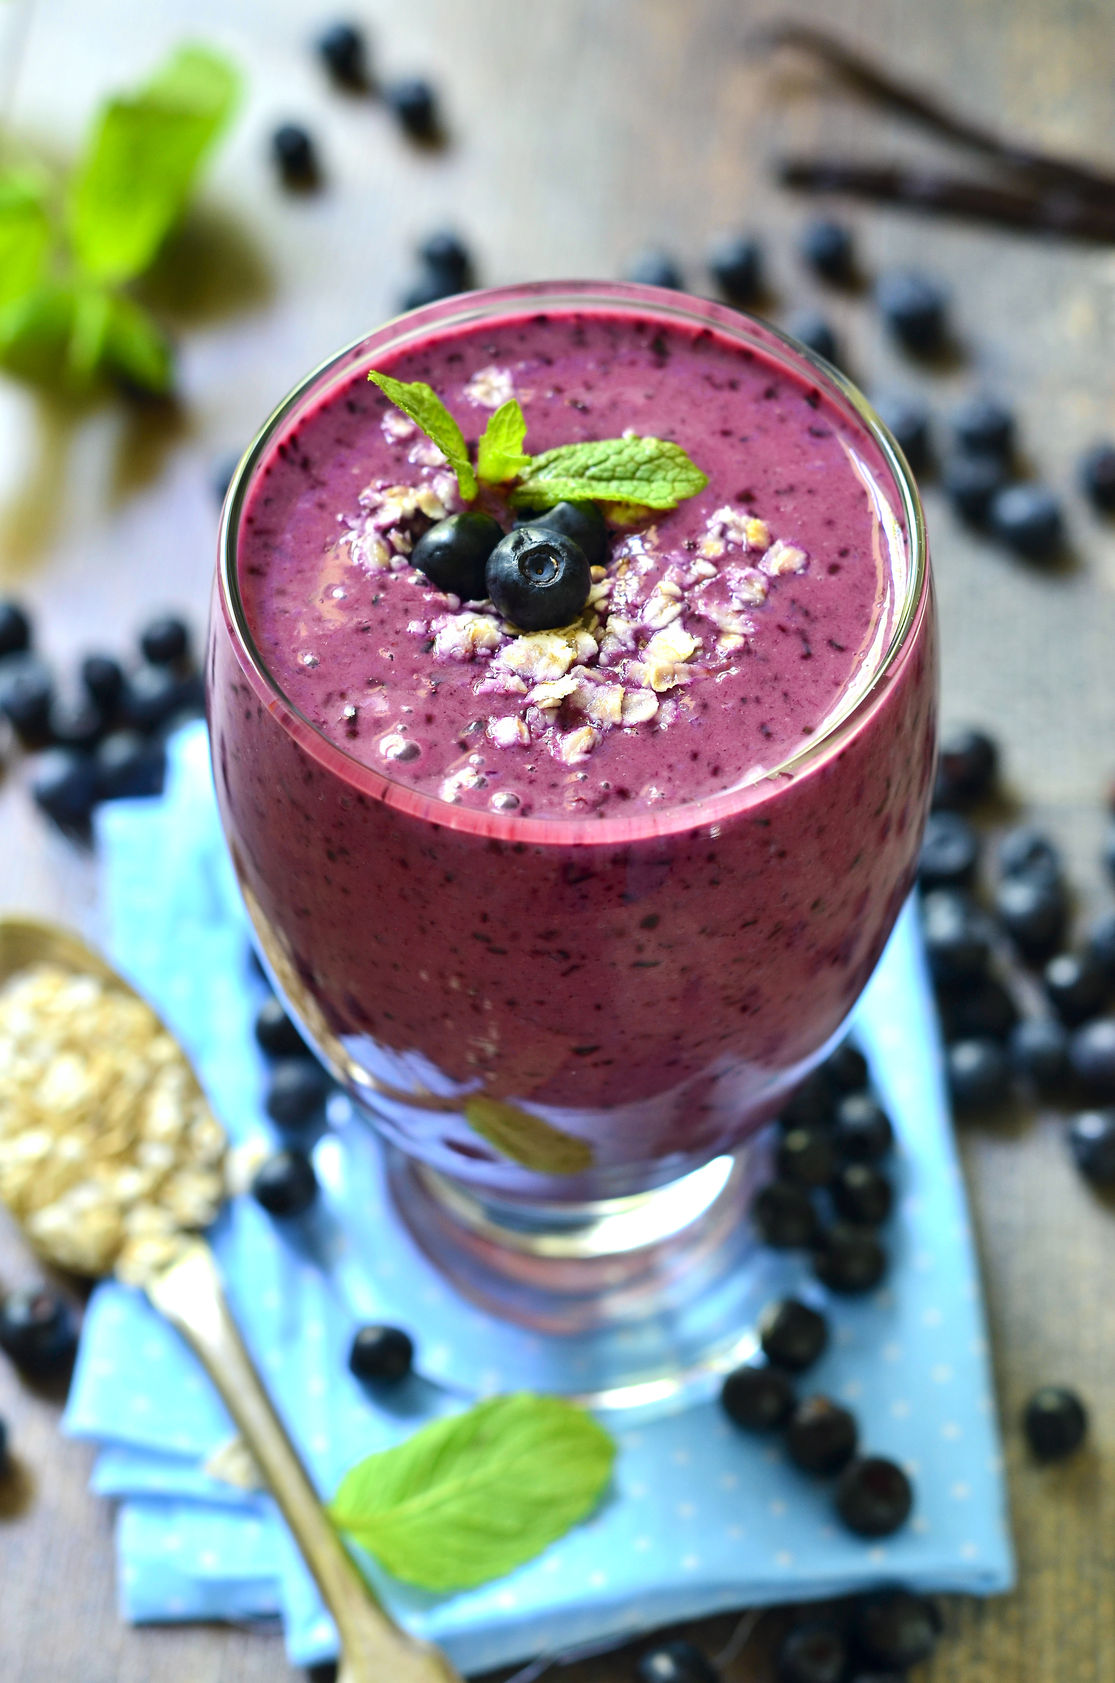 Blueberry and oats smoothie.  https://www.wocdetox.com/detox-drinks.html